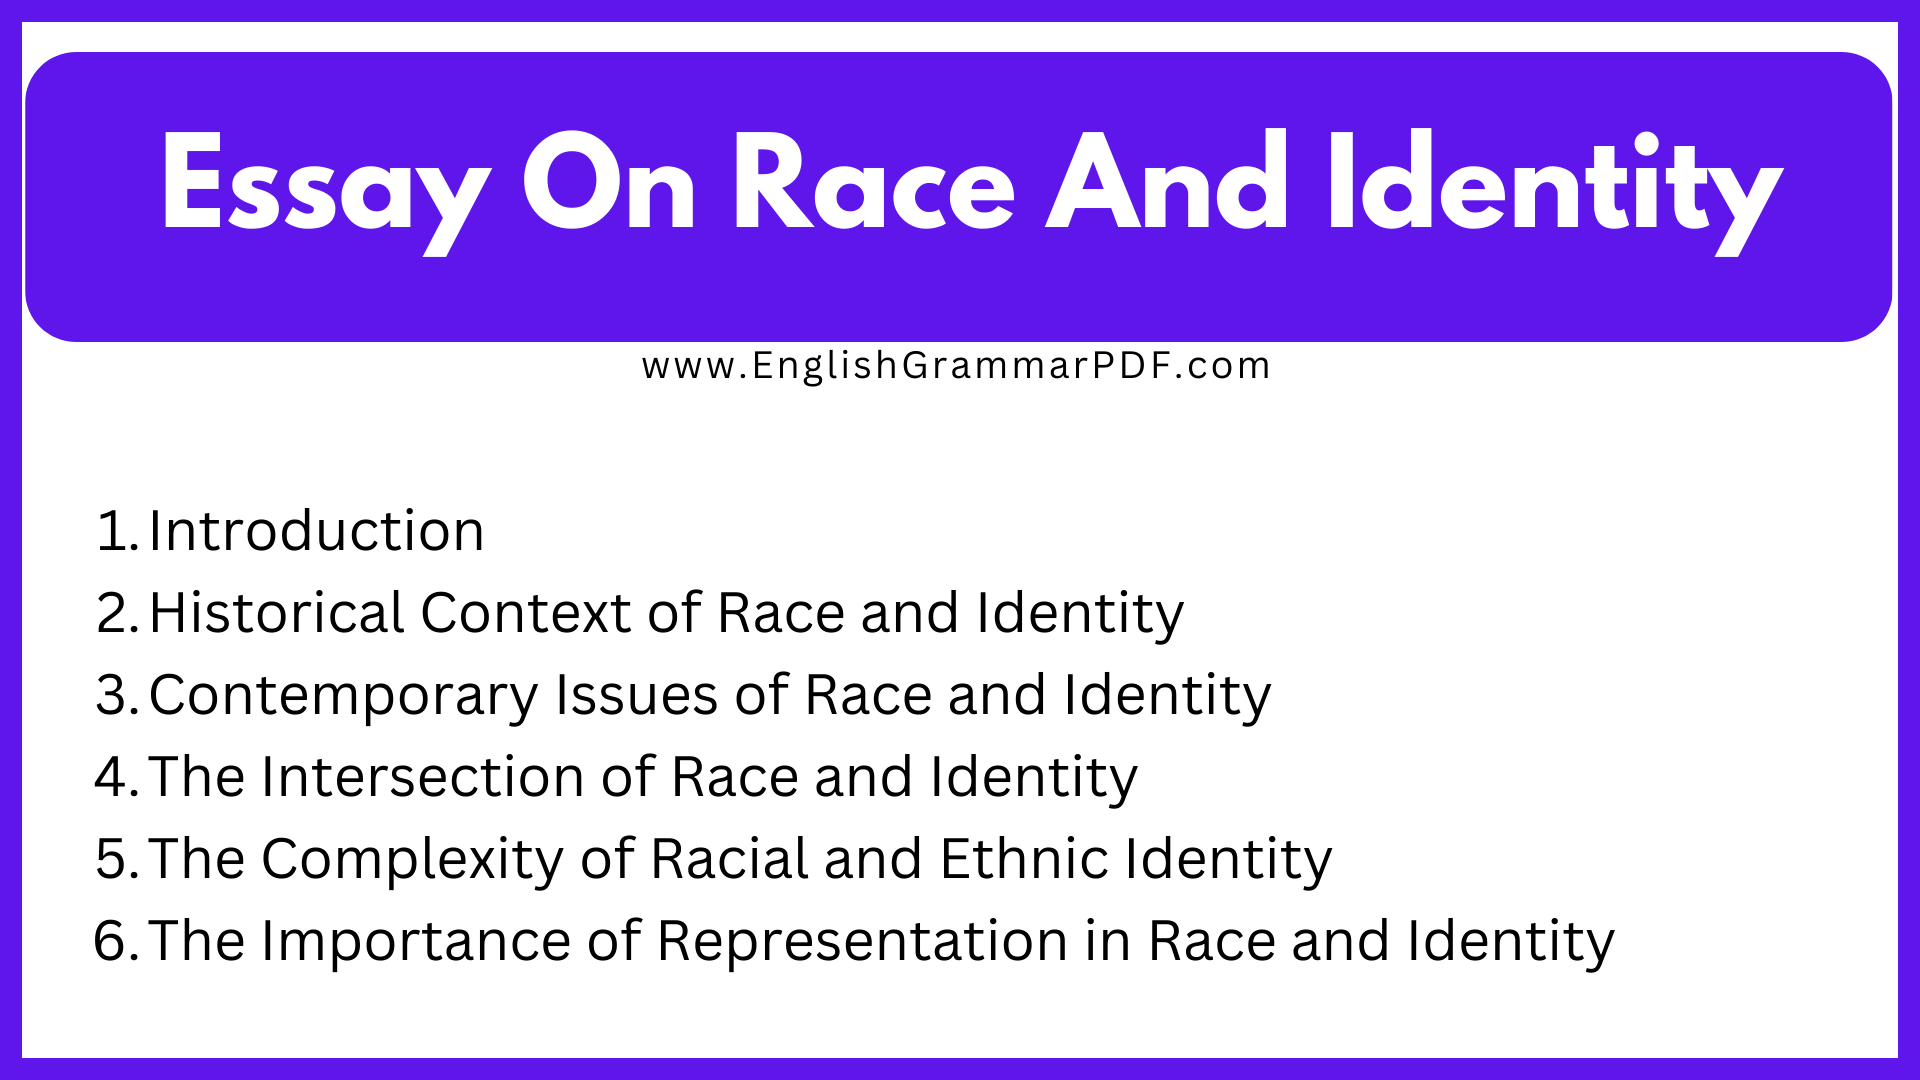 Essay On Race And Identity